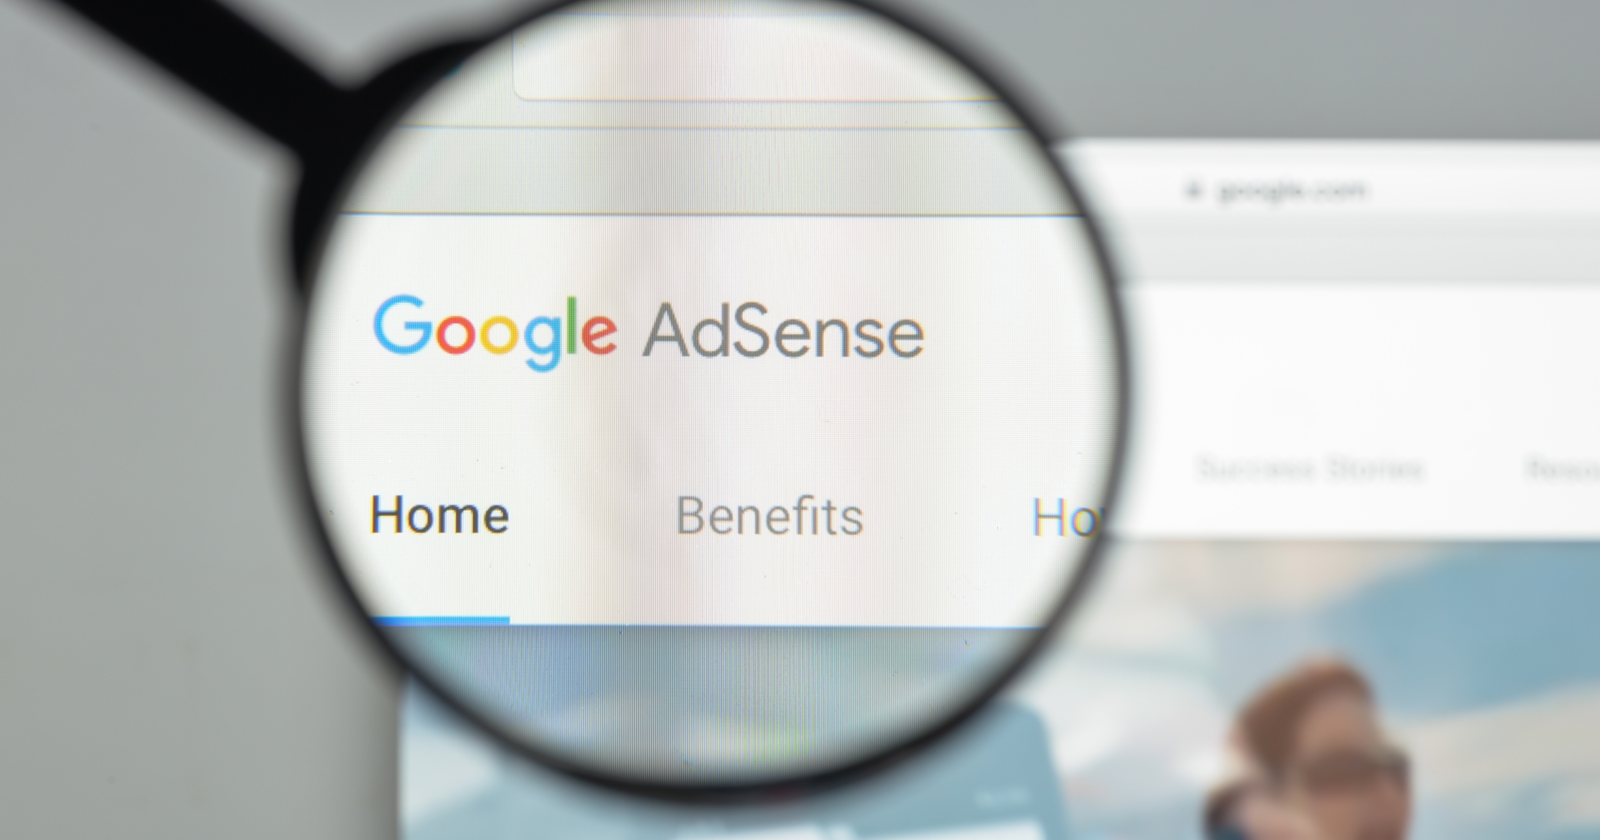 New Related Search Feature For AdSense Is Introduced via @sejournal, @brookeosmundson